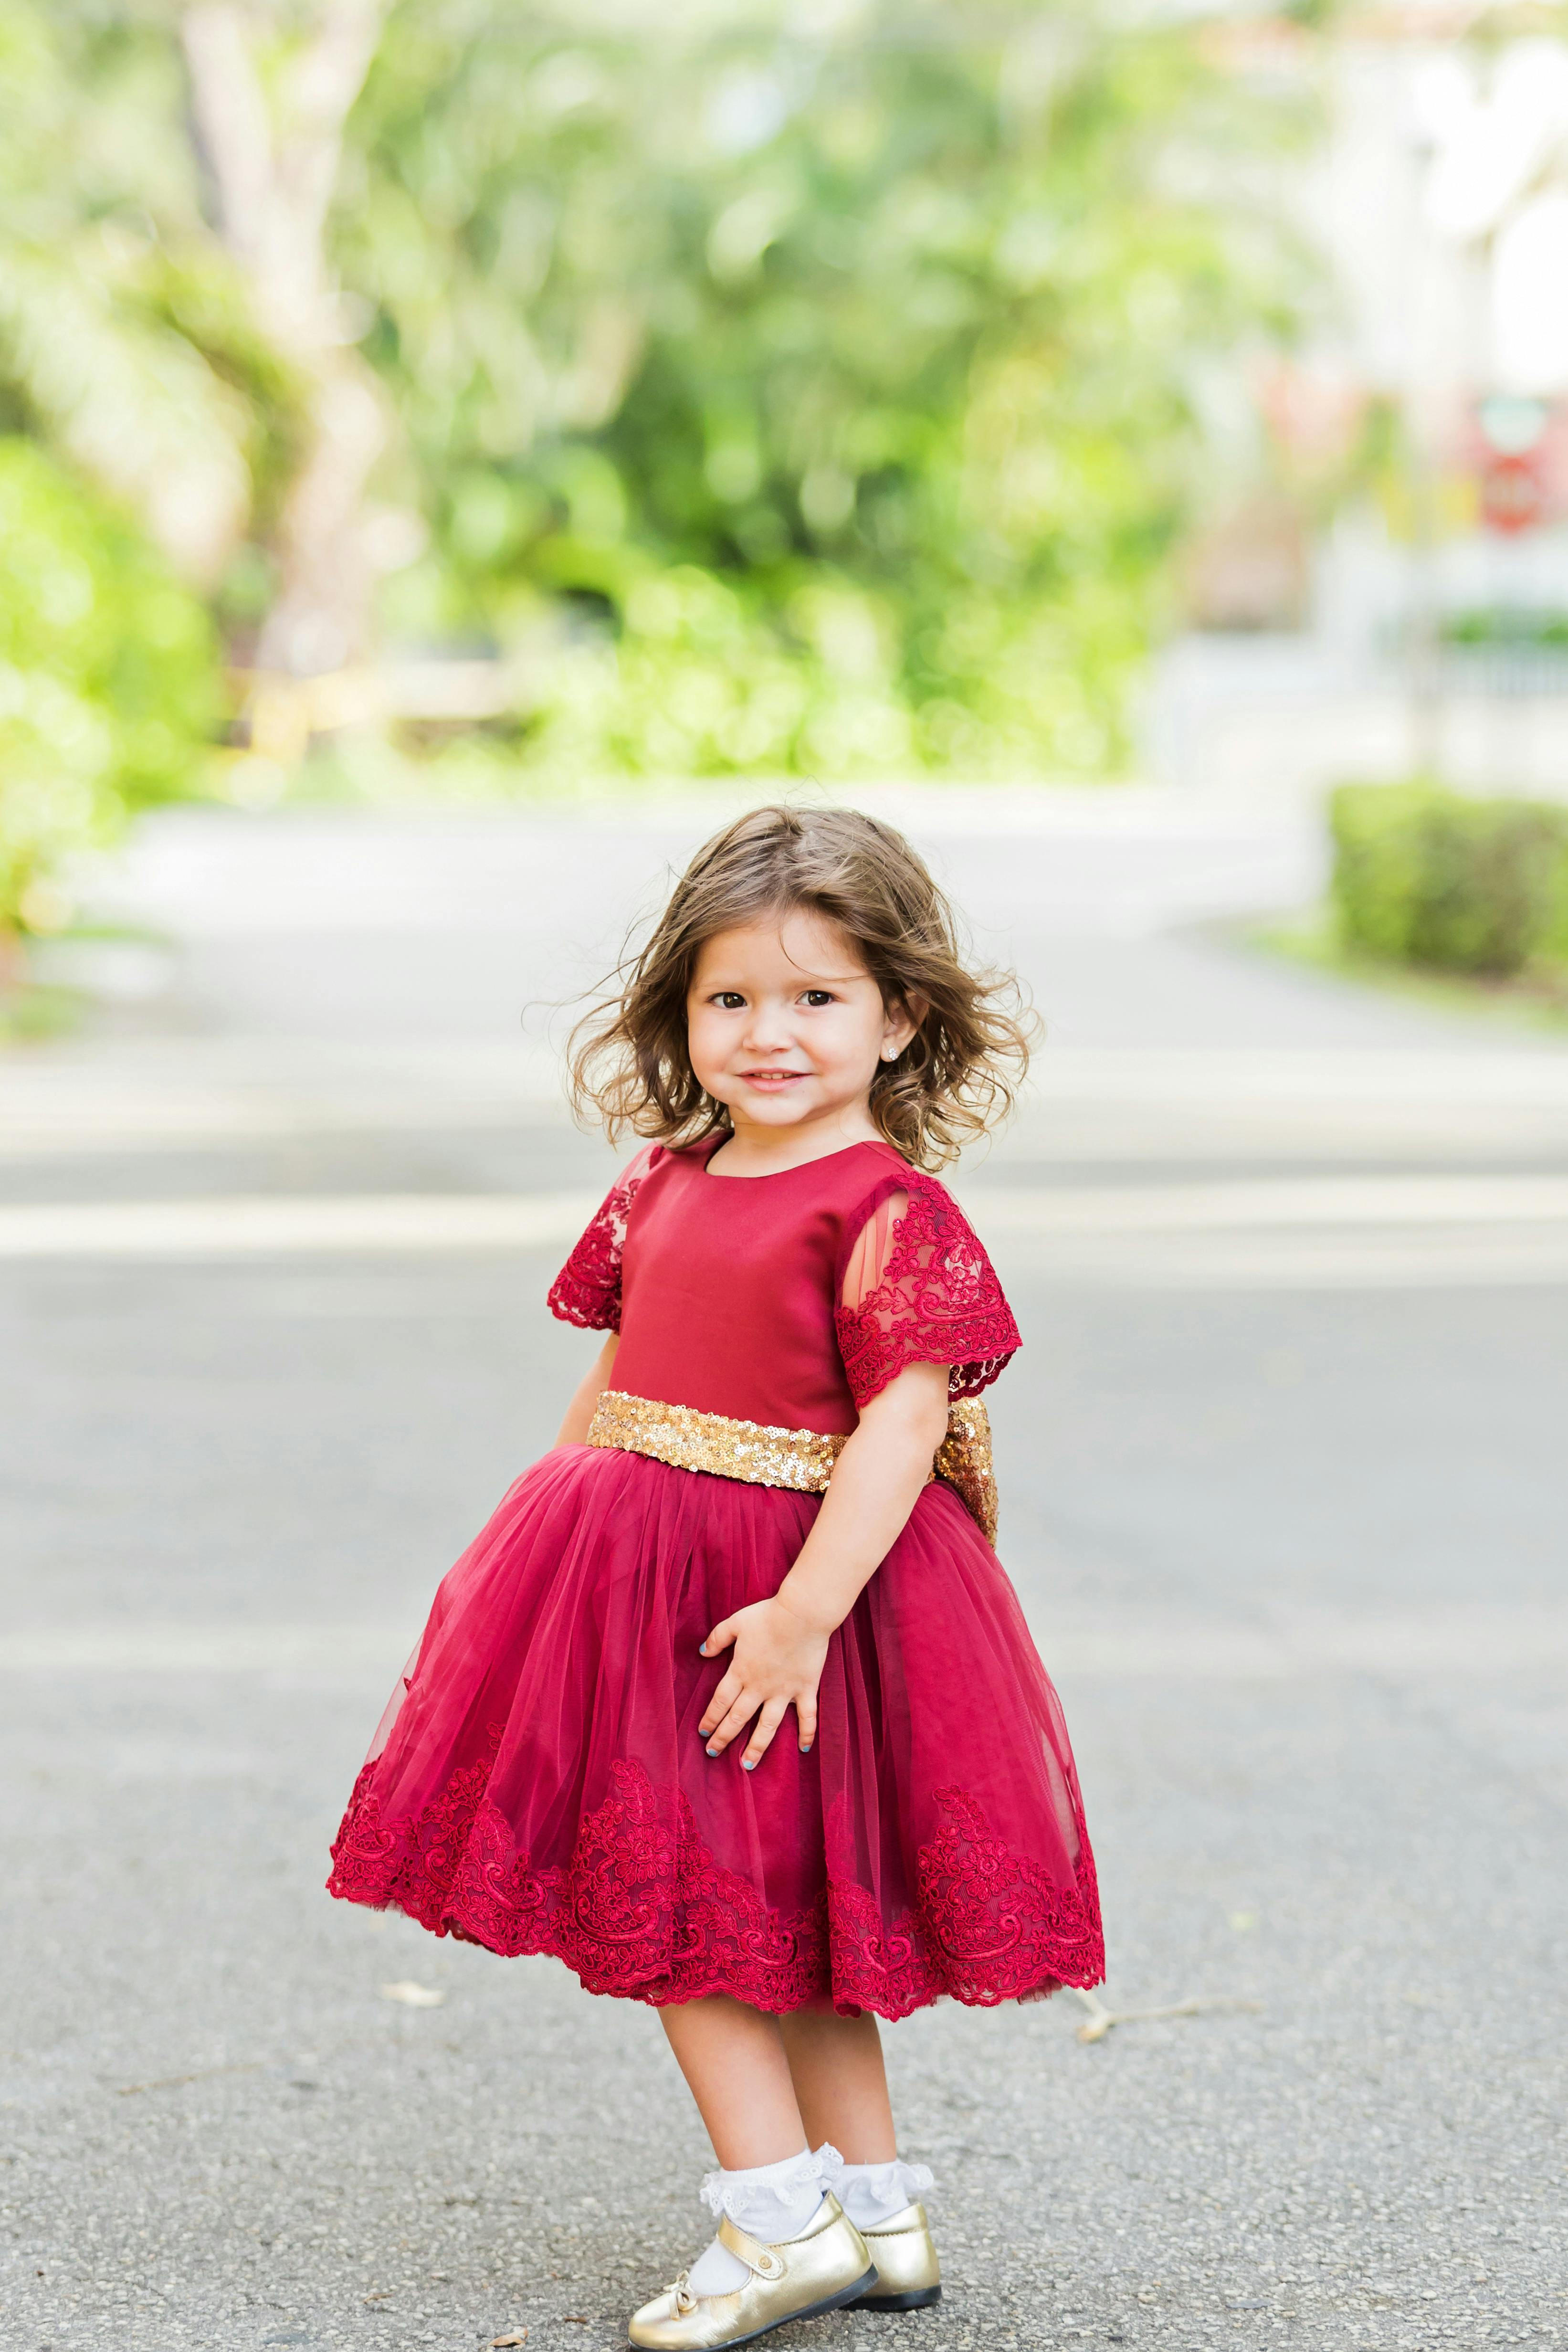 Red Isabela Dress – Itty Bitty Toes